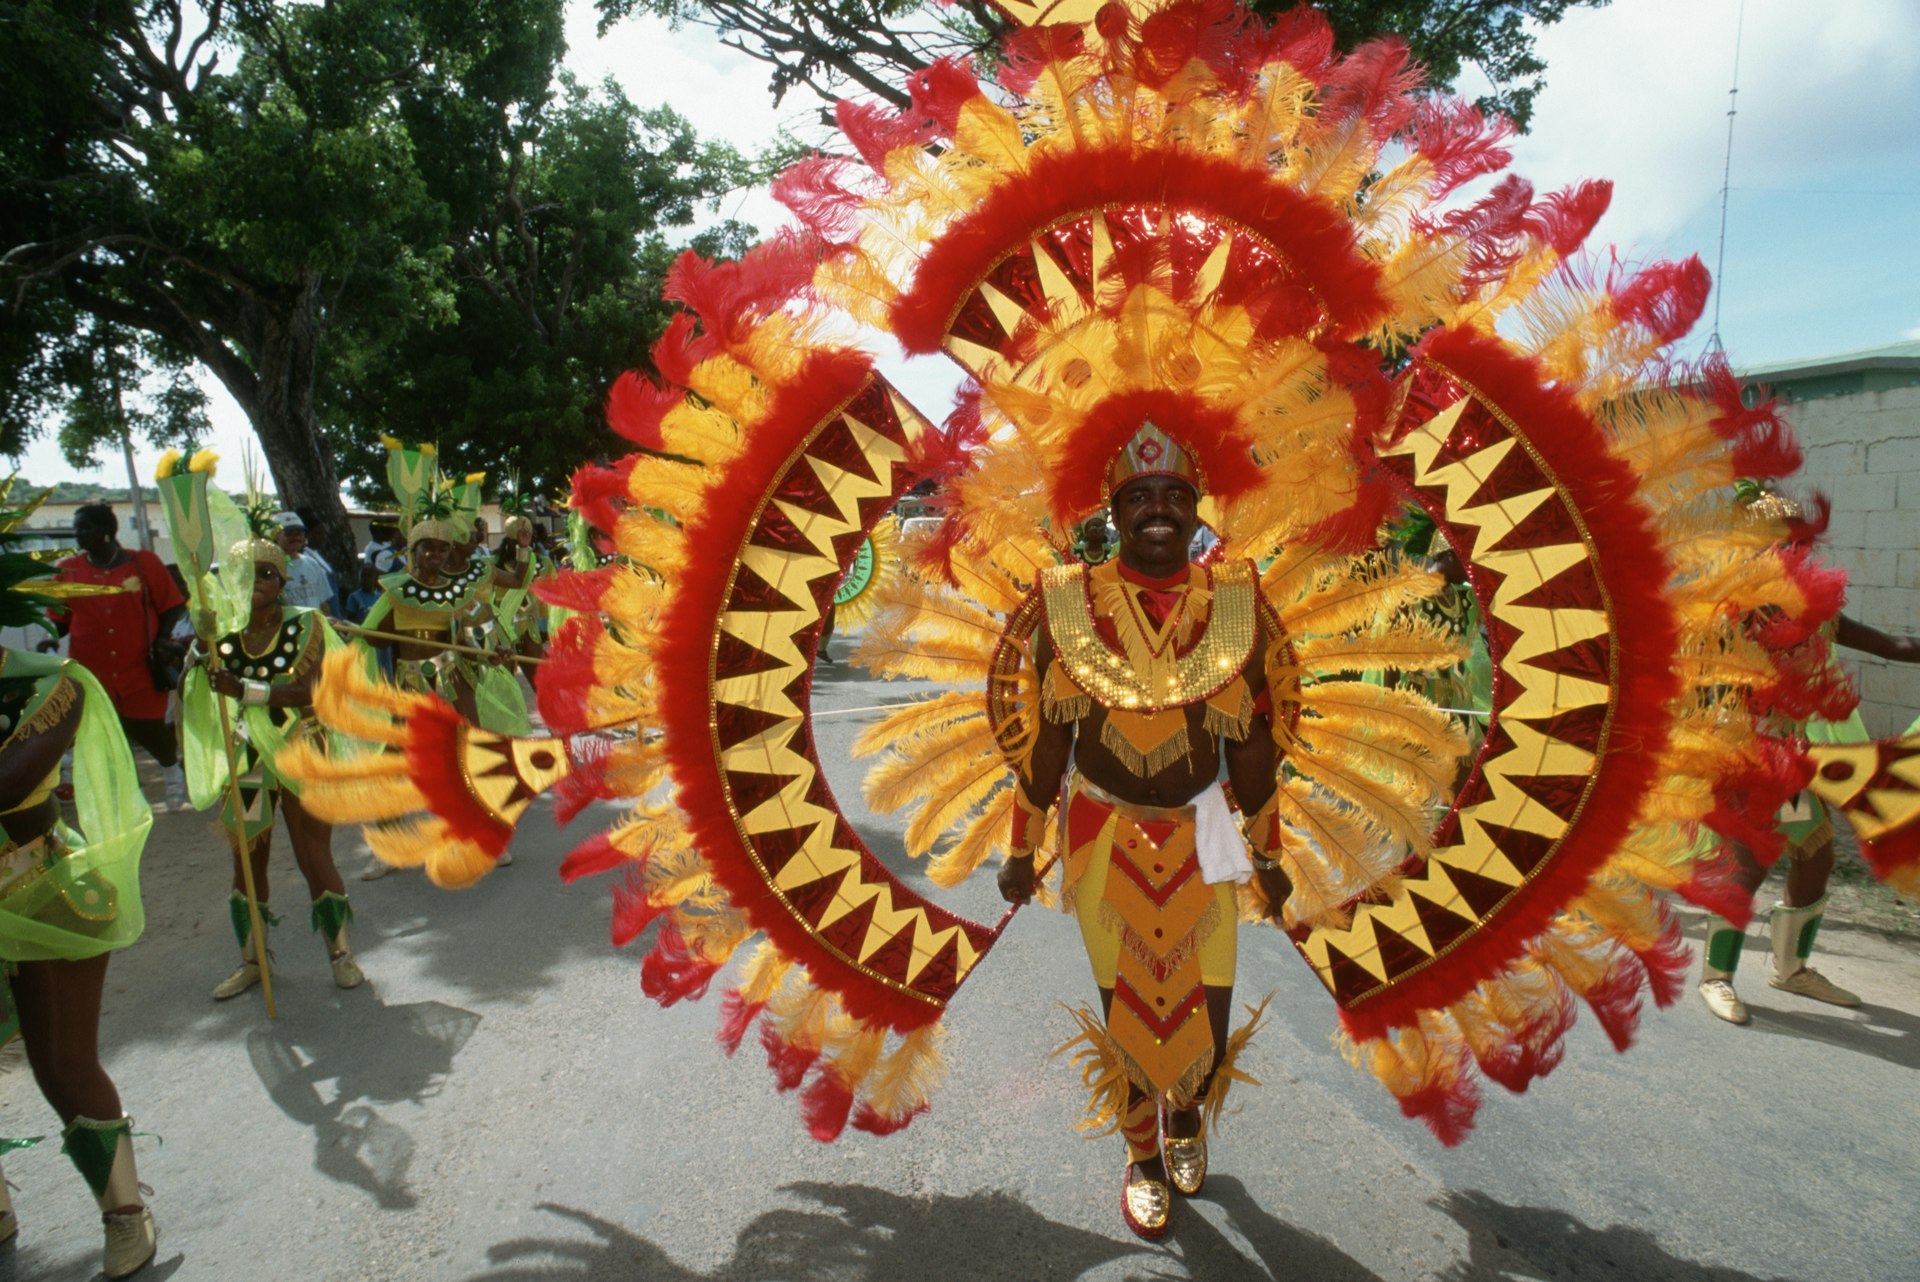 A man participates in the Parade of Troupes during Carnival Week Anguilla